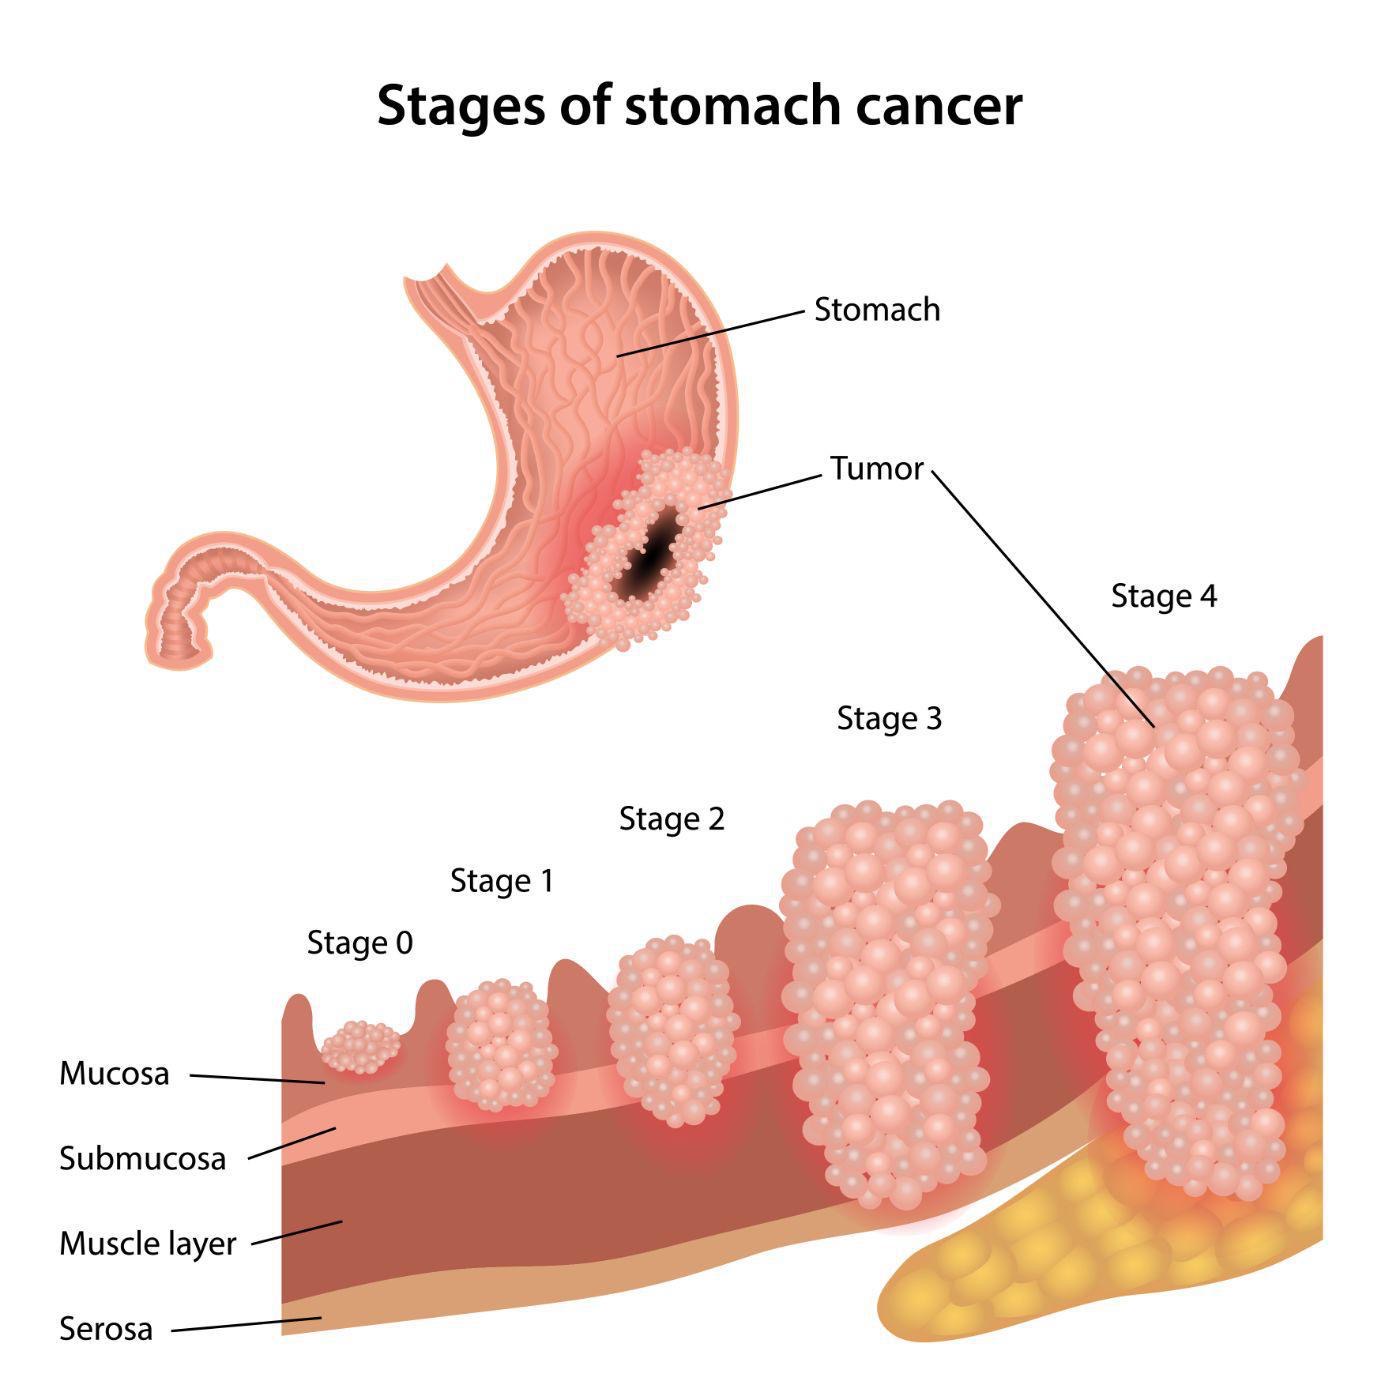 Stages of stomach cancer

  
 
  
 
 

Mucosa
Submucosa
Muscle layer

Serosa